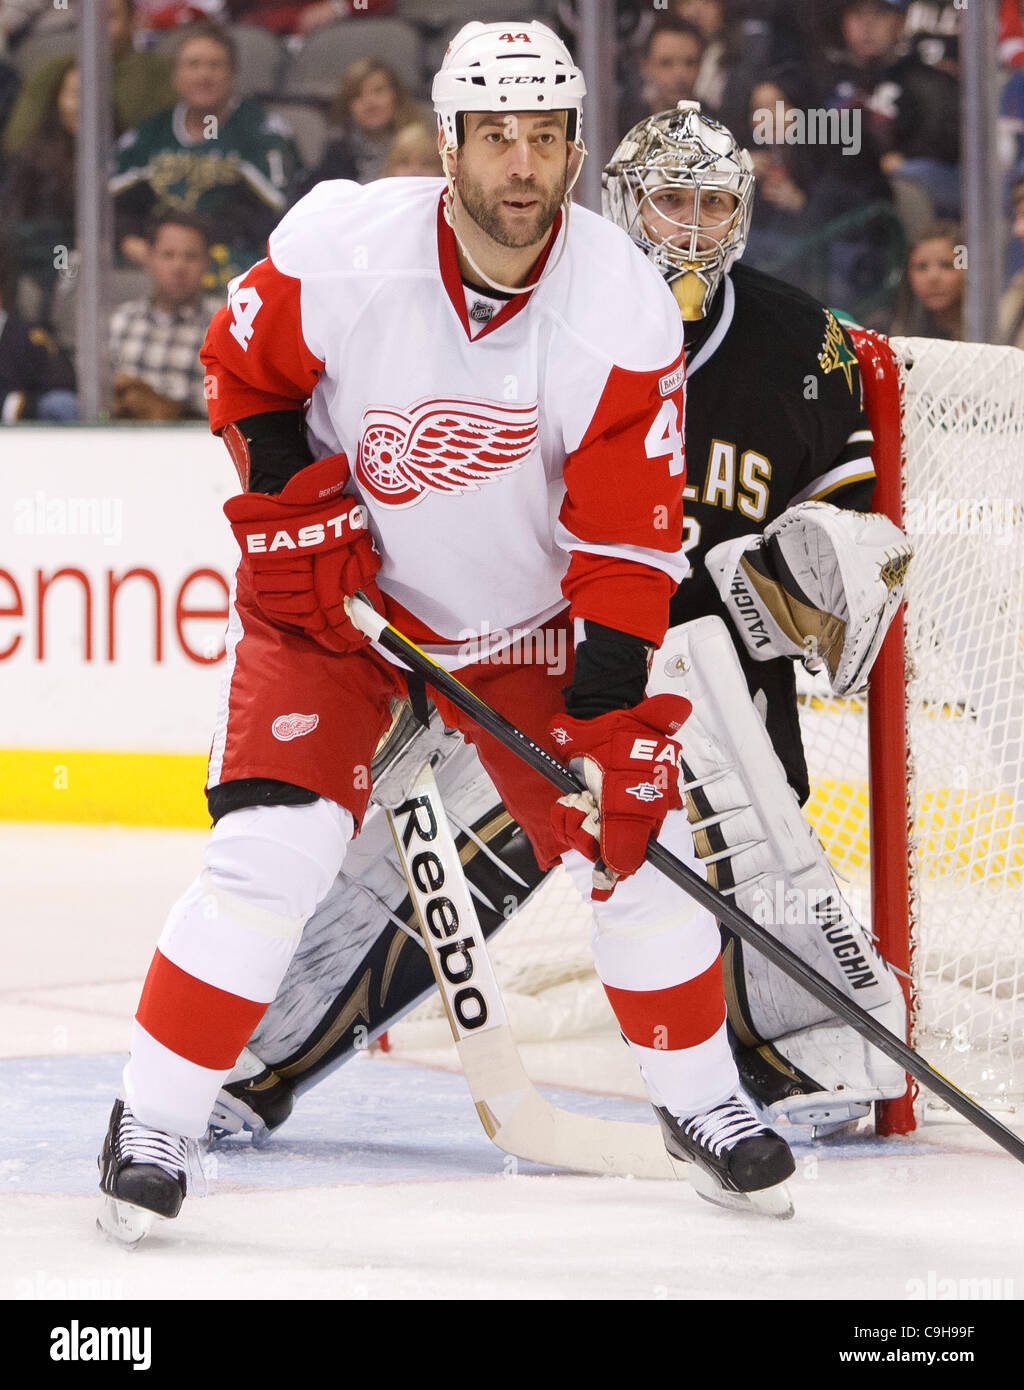 Todd Bertuzzi Hopes for Makeover With Red Wings in Career's Final